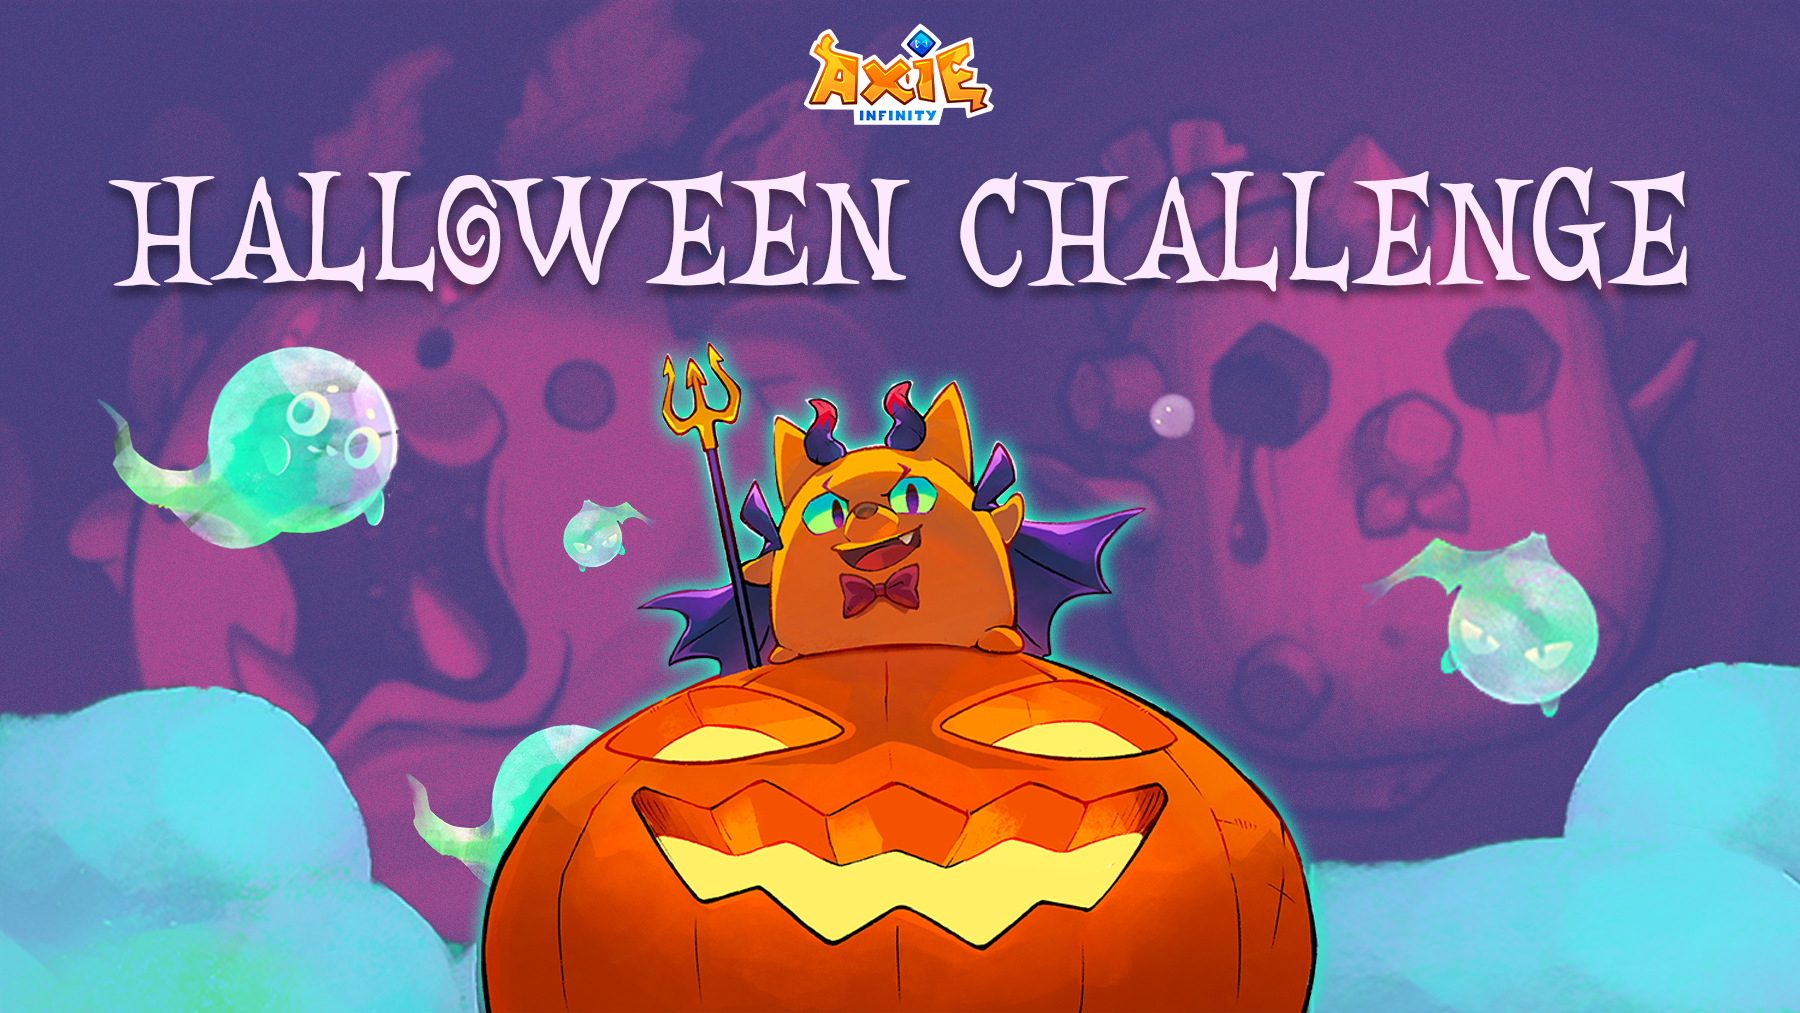 Axie Infinity Announced Axie Halloween Contests with AXS Prizes